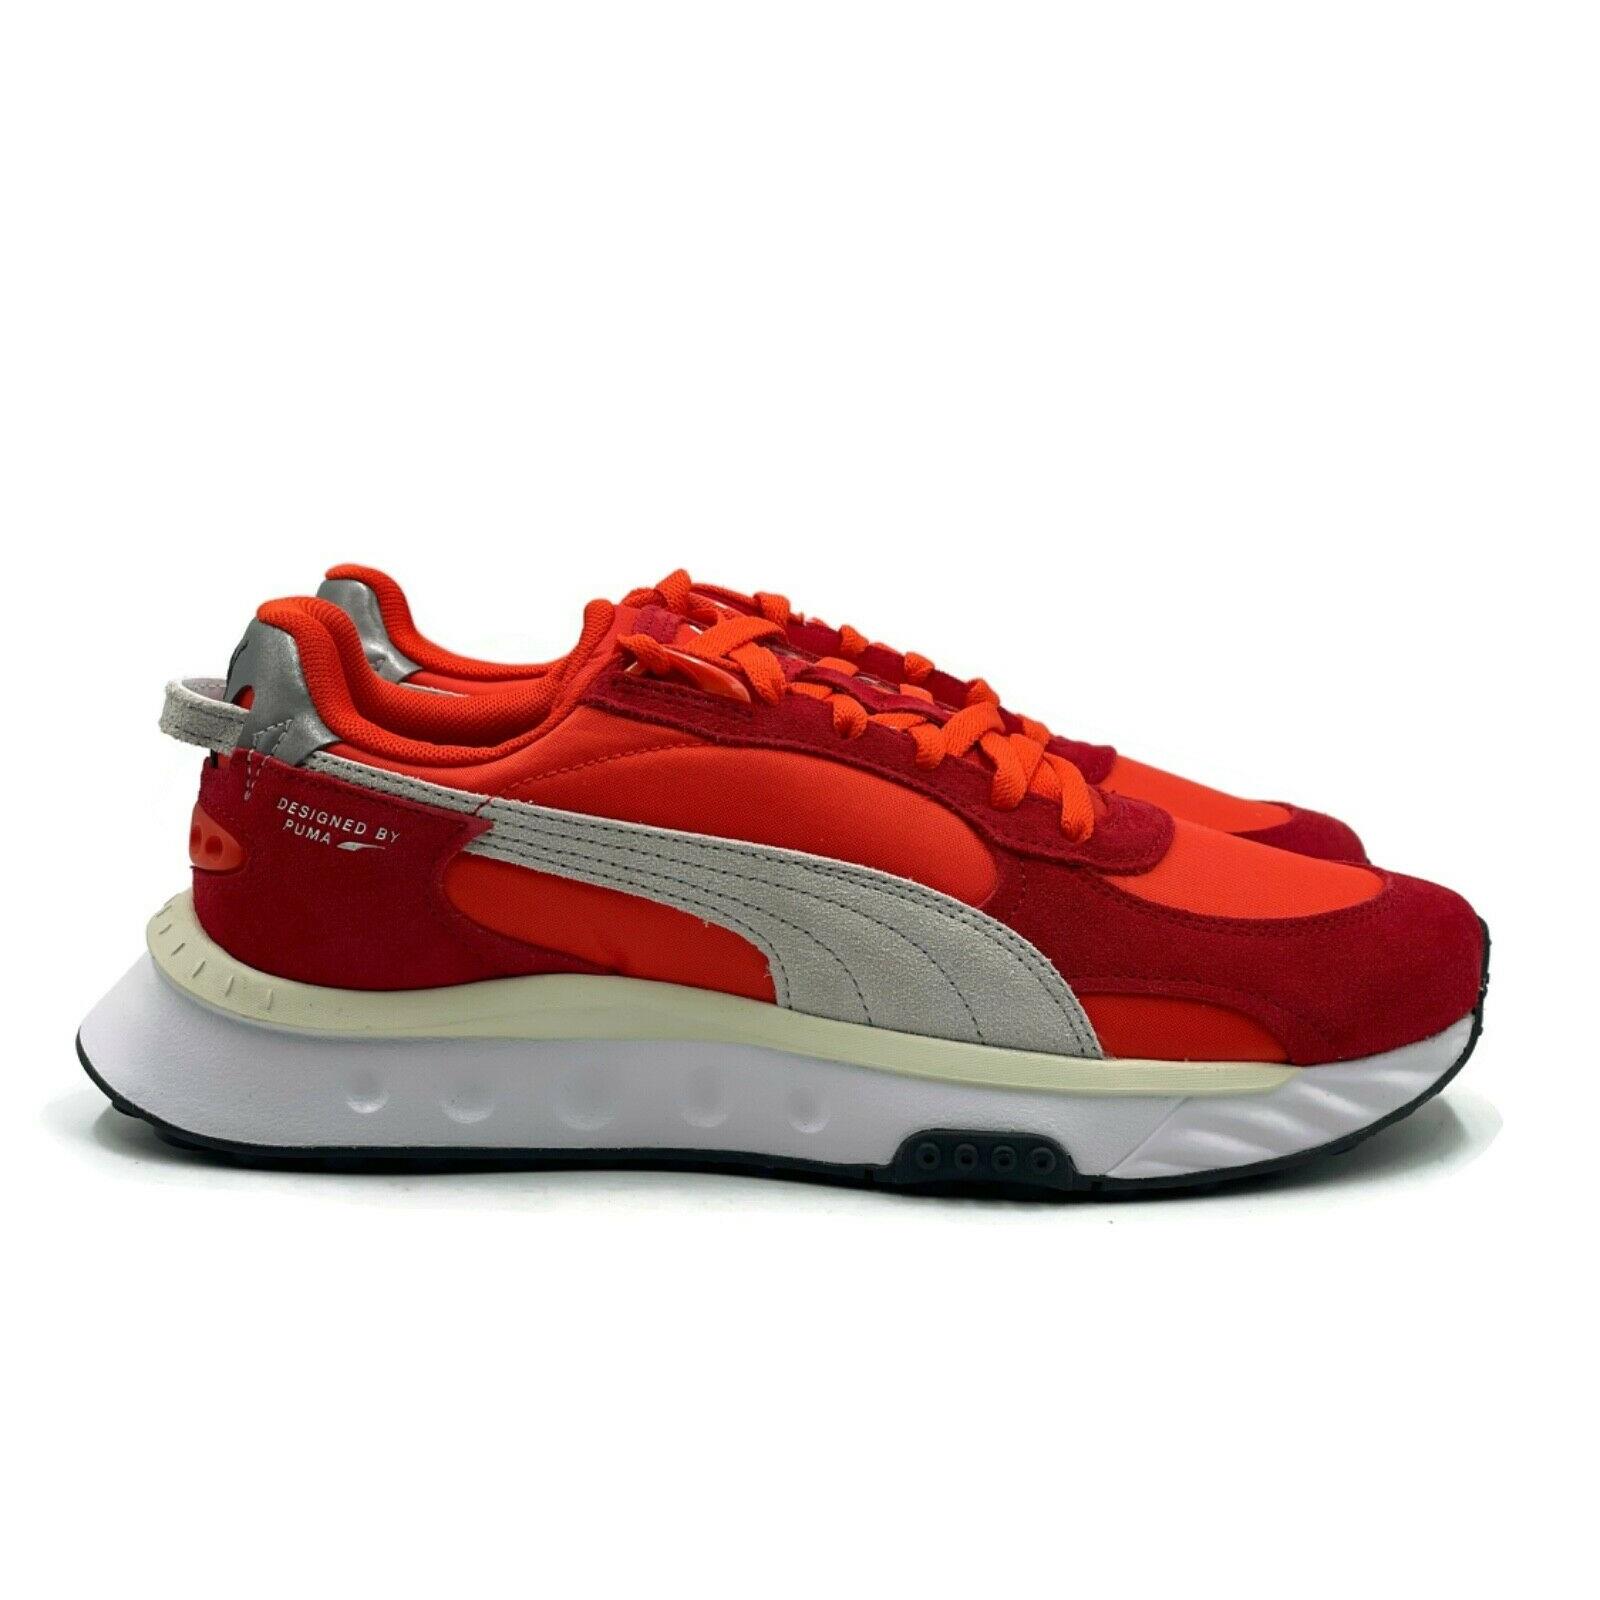 Puma Wild Rider Pickup Mens Size 8 Casual Shoe Red Athletic Trainer Sneaker